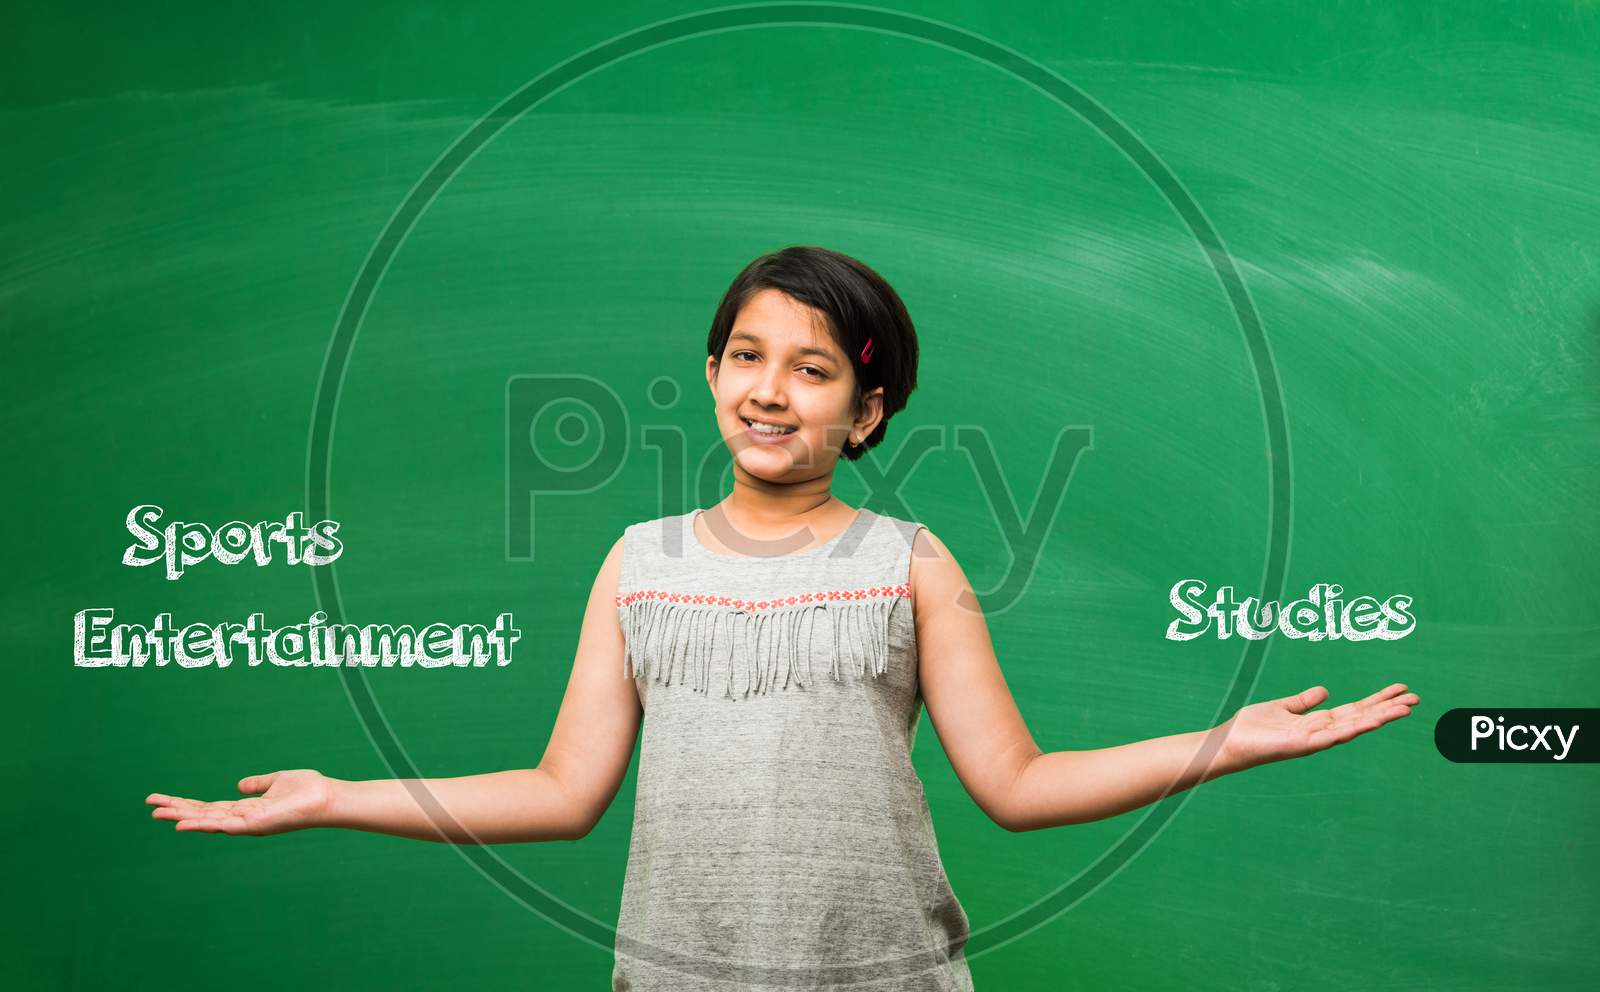 Little school girl standing in front of green scalk board with doodles - education and kids concept